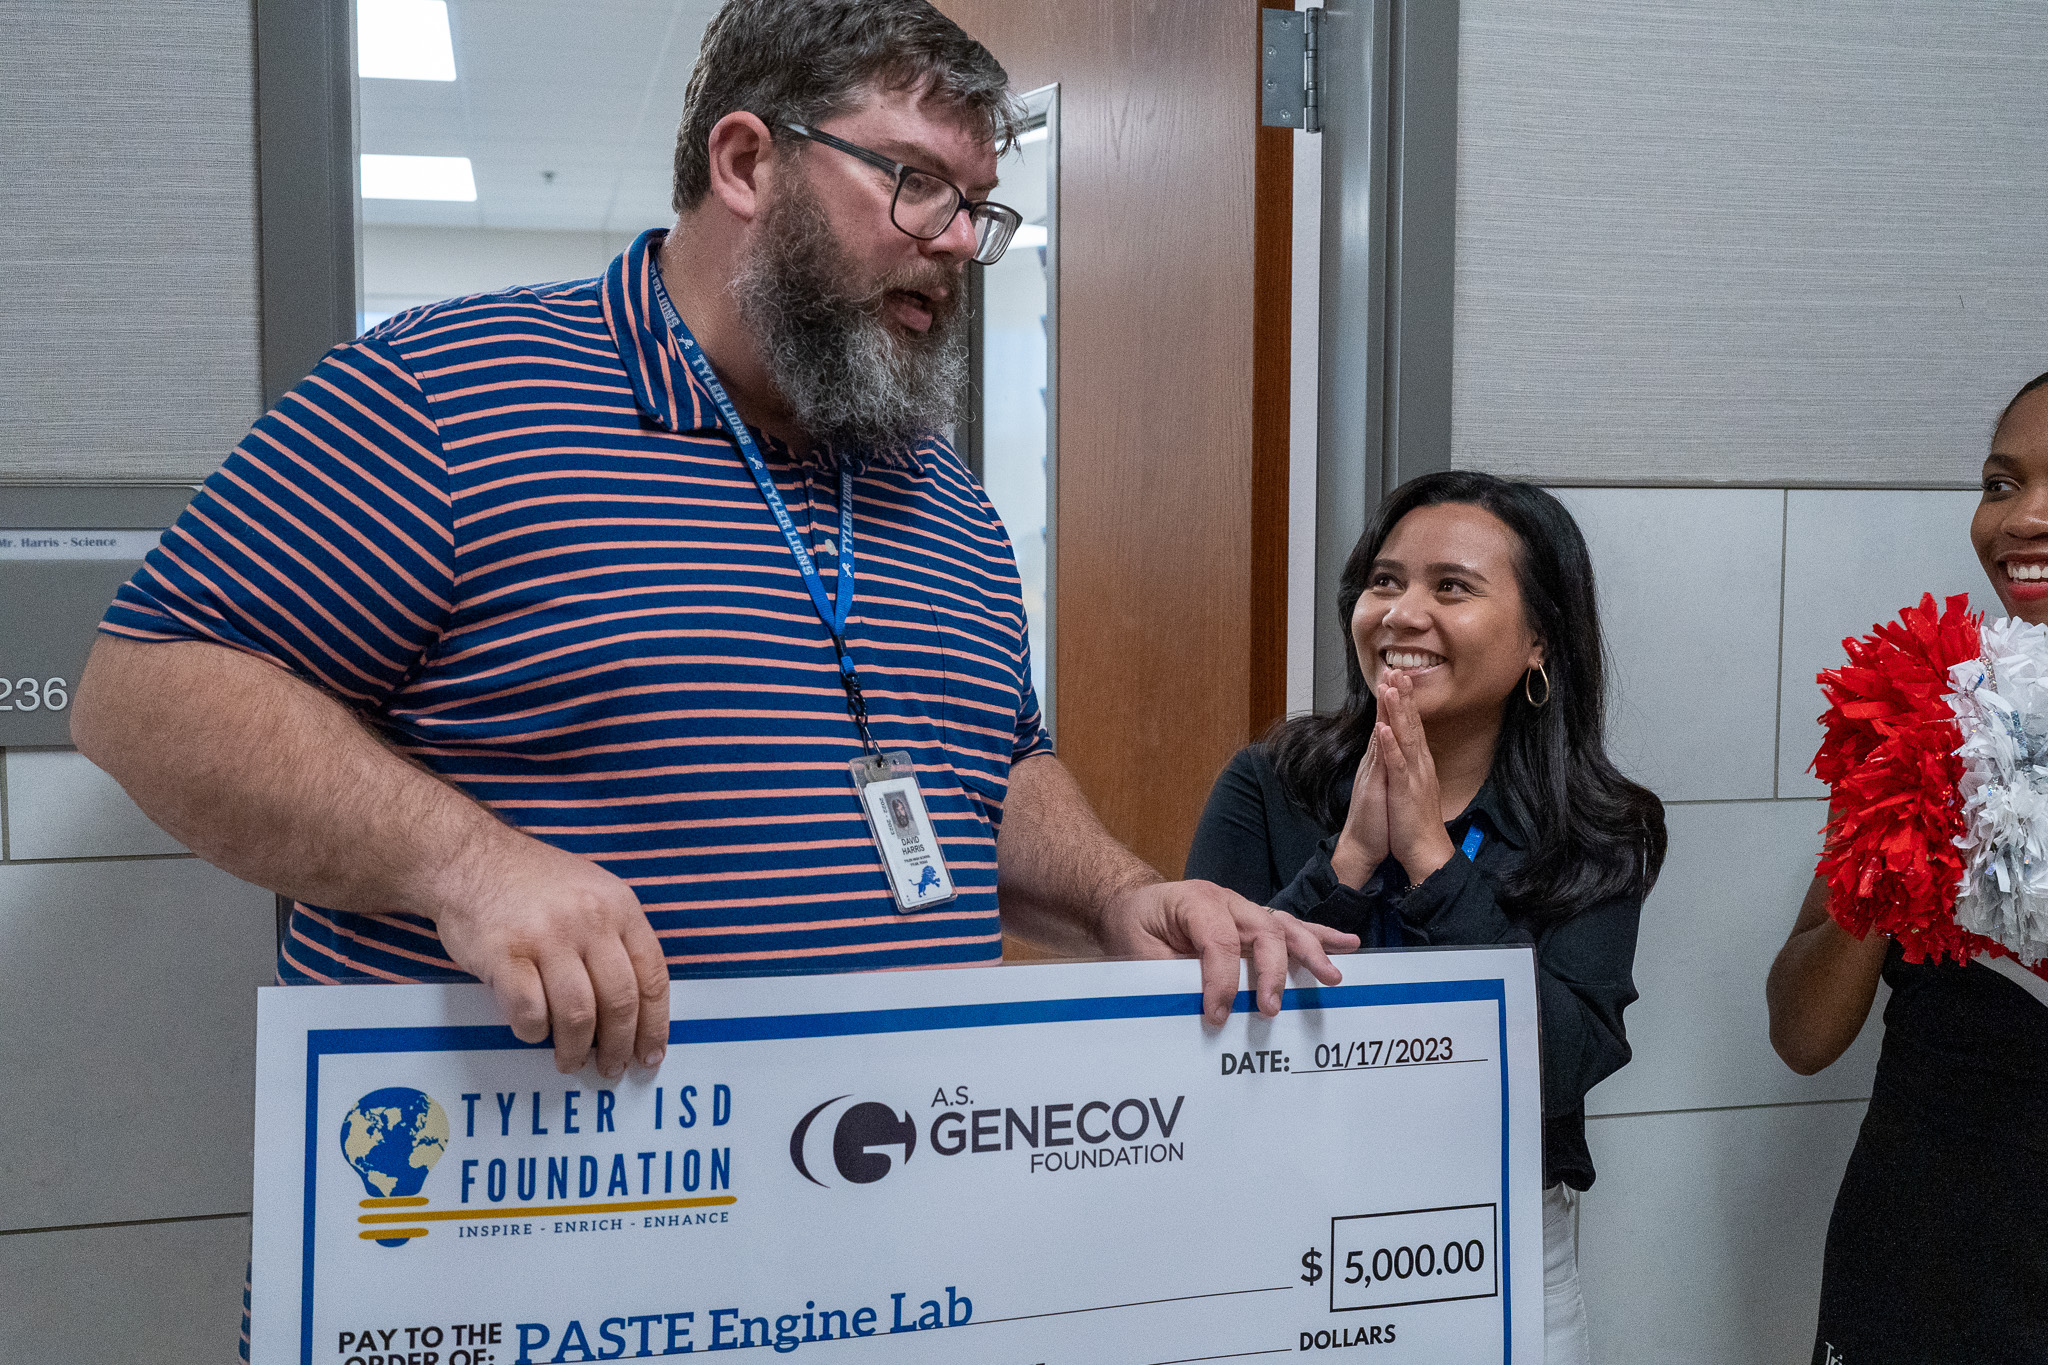 man getting surprised with a giant check for a grant